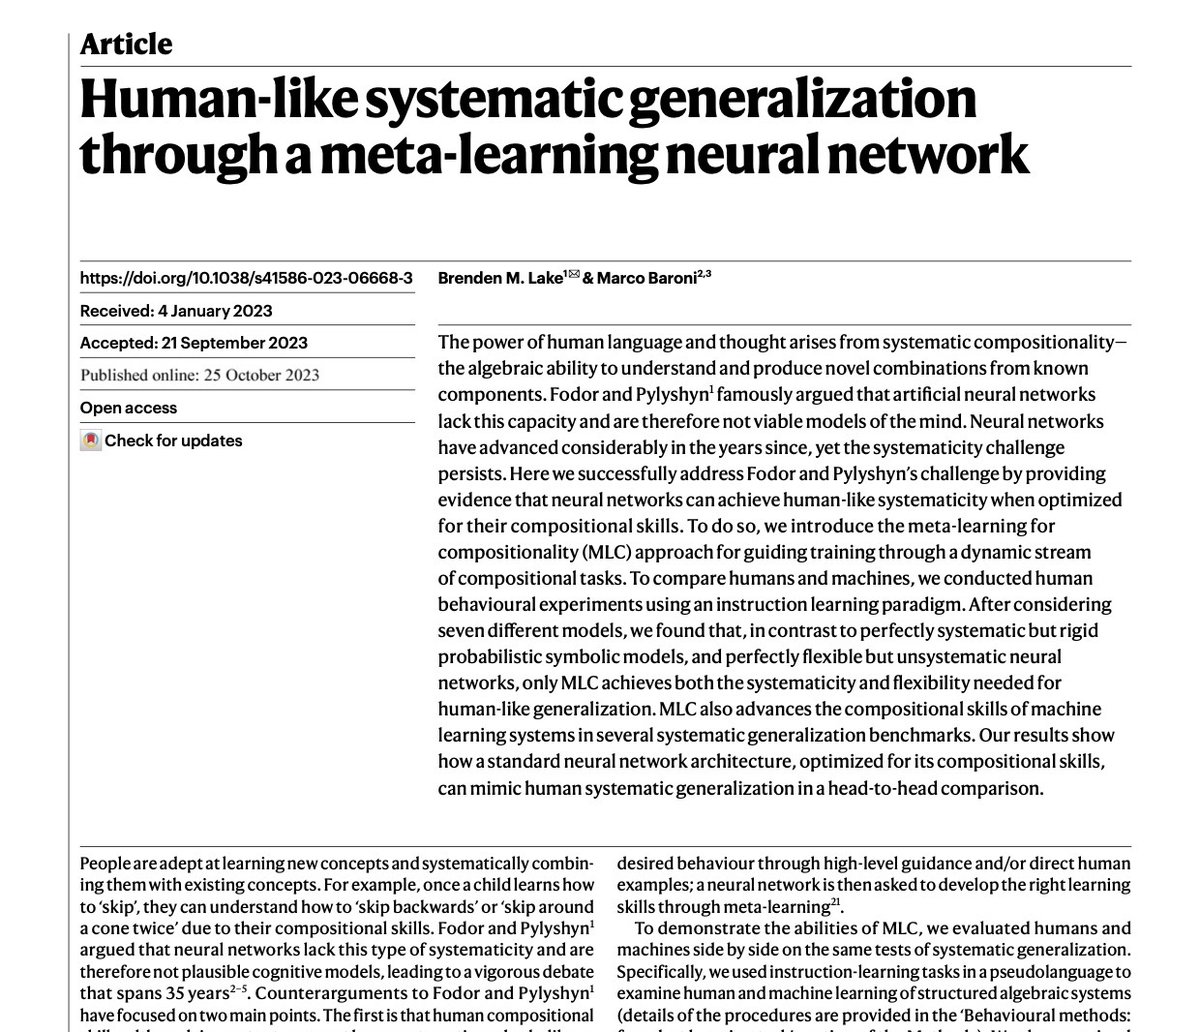 Today in Nature, we show how a standard neural net, optimized for compositional skills, can mimic human systematic generalization (SG) in a head-to-head comparison. This is the capstone of a 5 year effort with Marco Baroni to make progress on SG. (1/8) nature.com/articles/s4158…